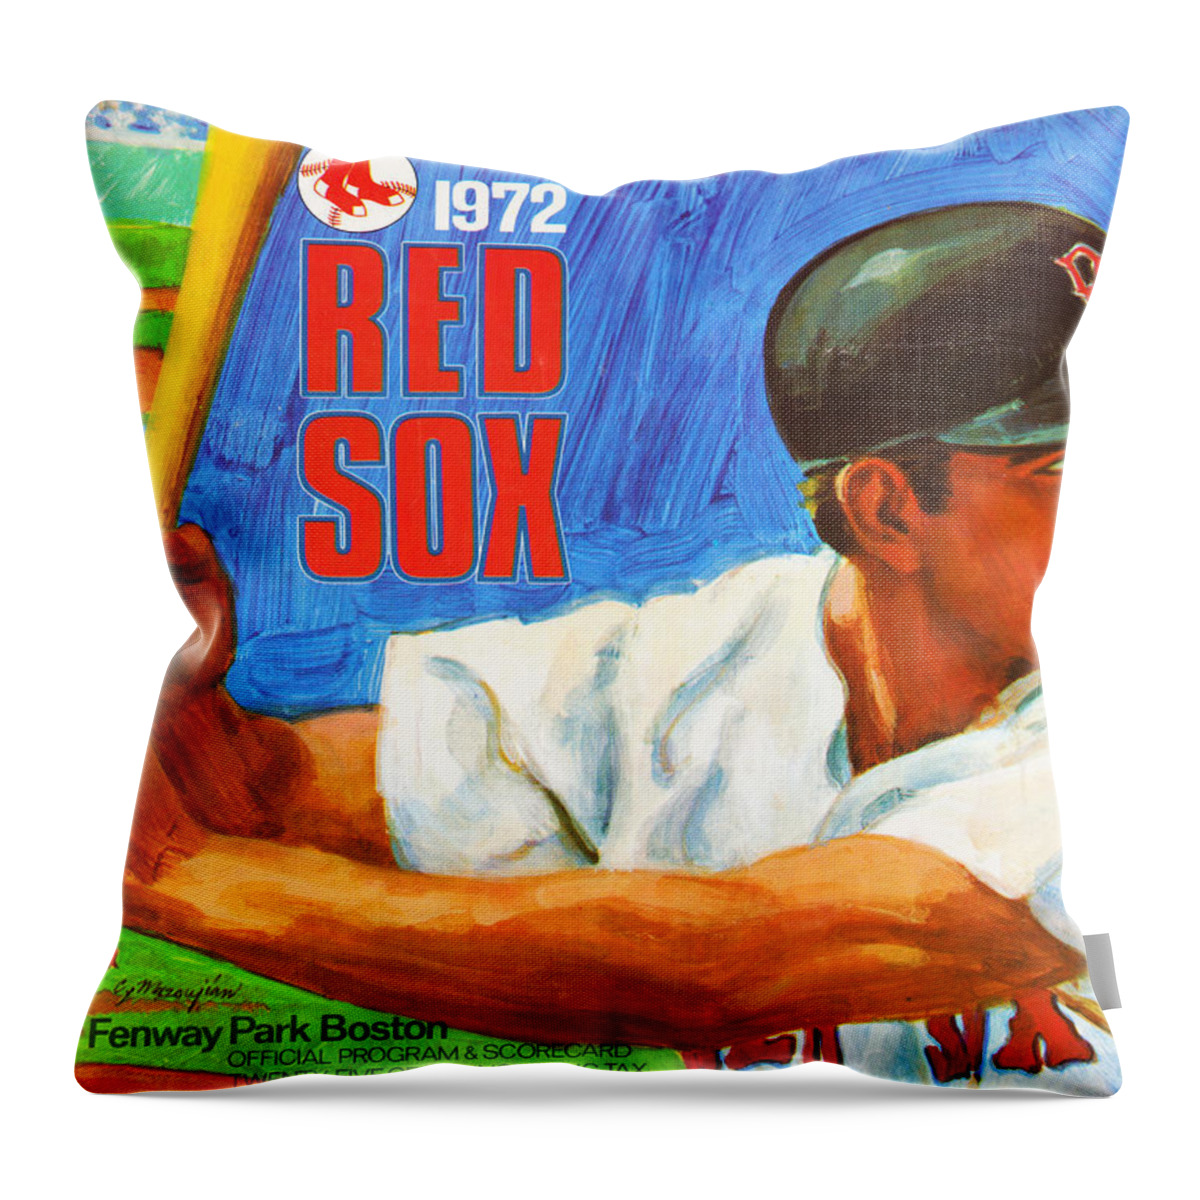 Boston Red Sox Throw Pillow featuring the mixed media 1972 Boston Red Sox by Row One Brand